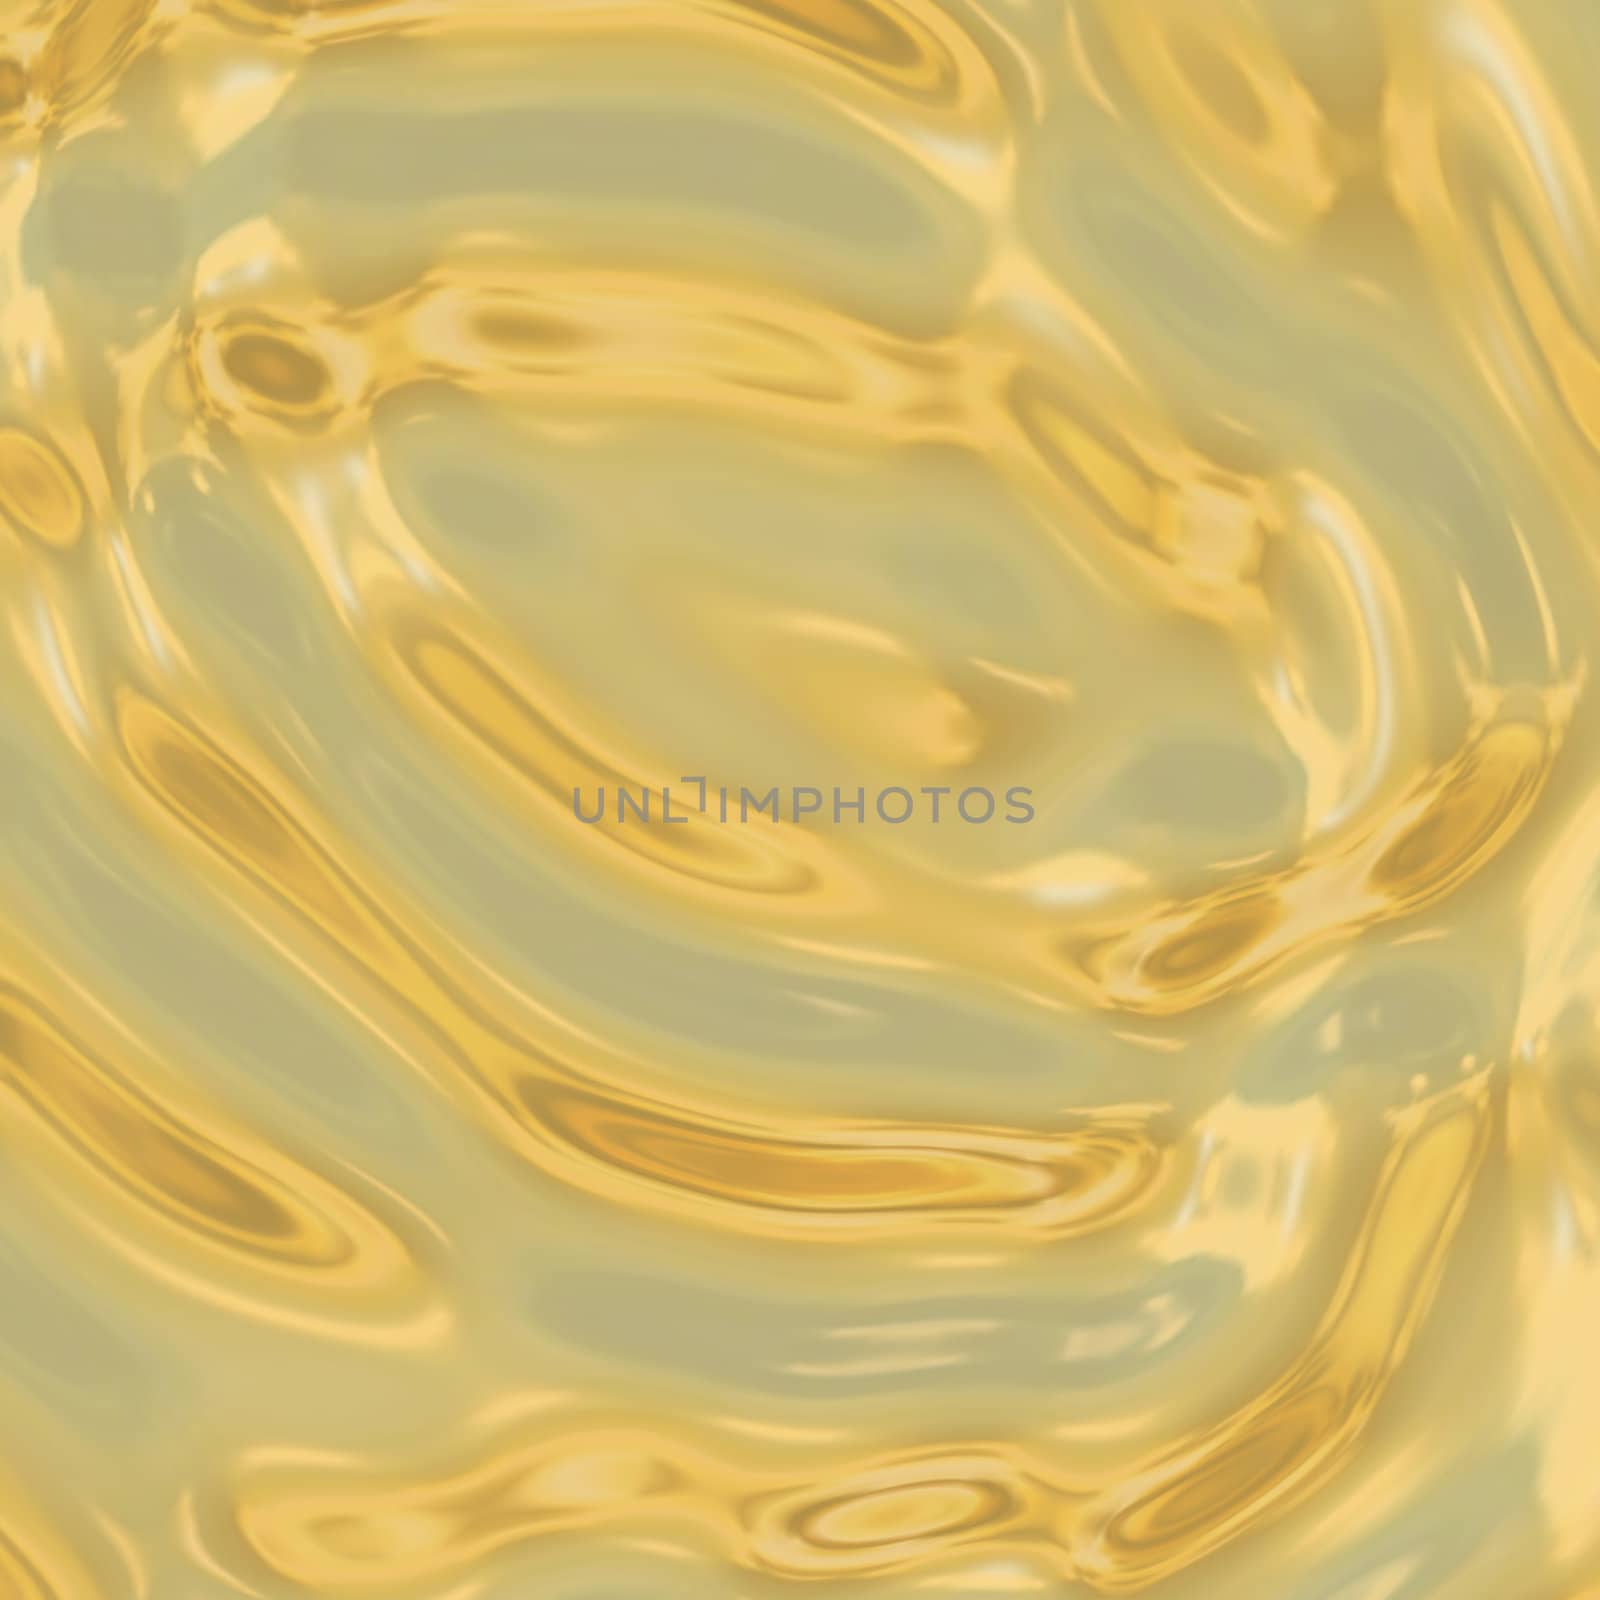 a very large plate of nice and shiny liquid or molten gold